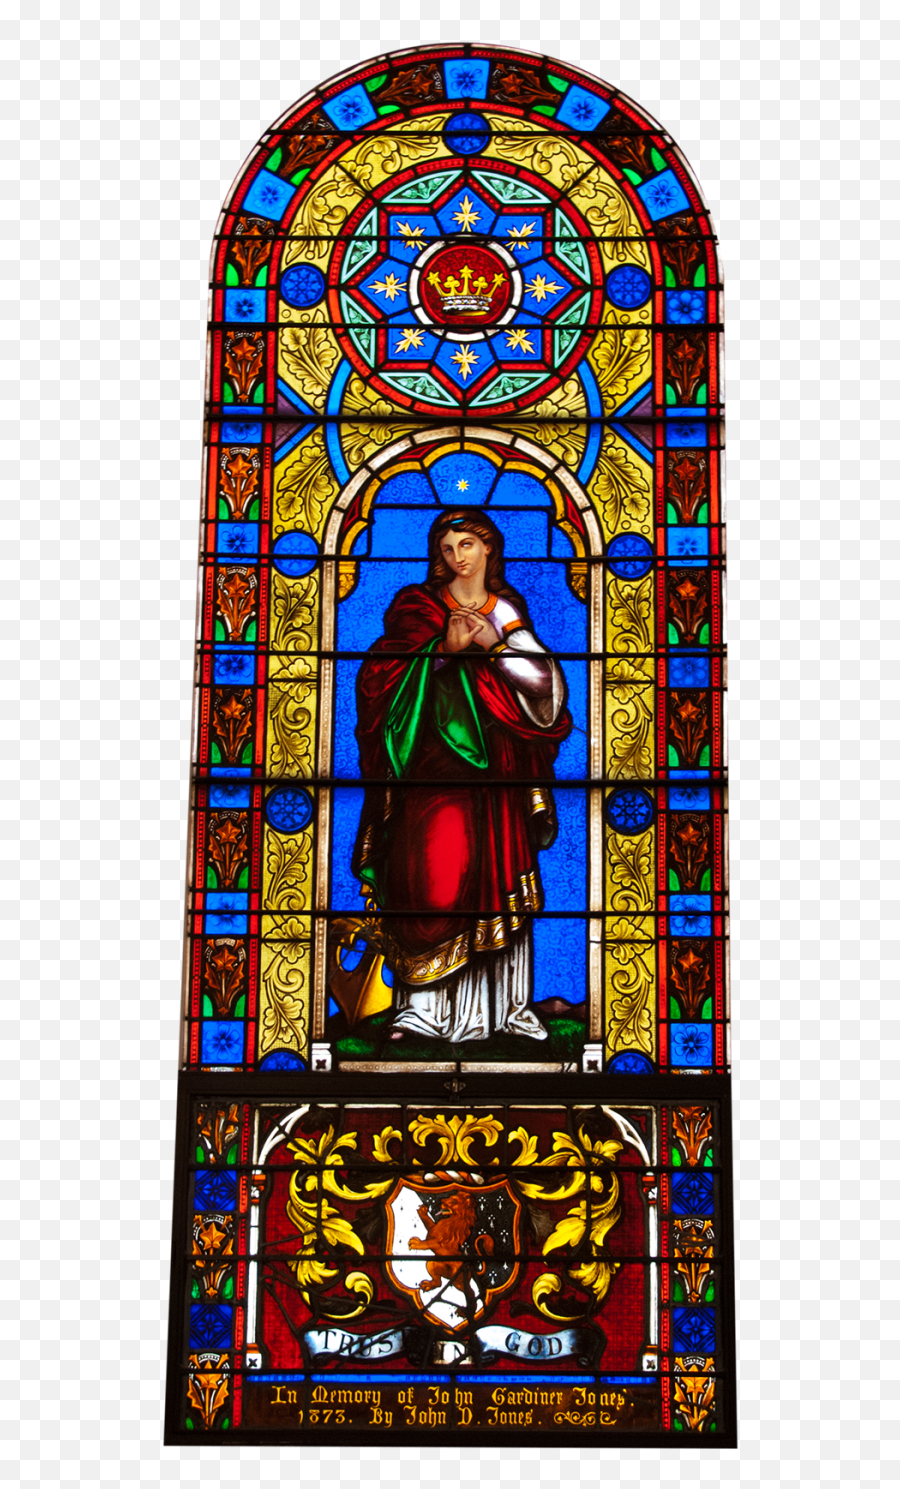 Stained Glass St Johnu0027s Episcopal Church - Stained Glass Window Png,Stained Glass Png